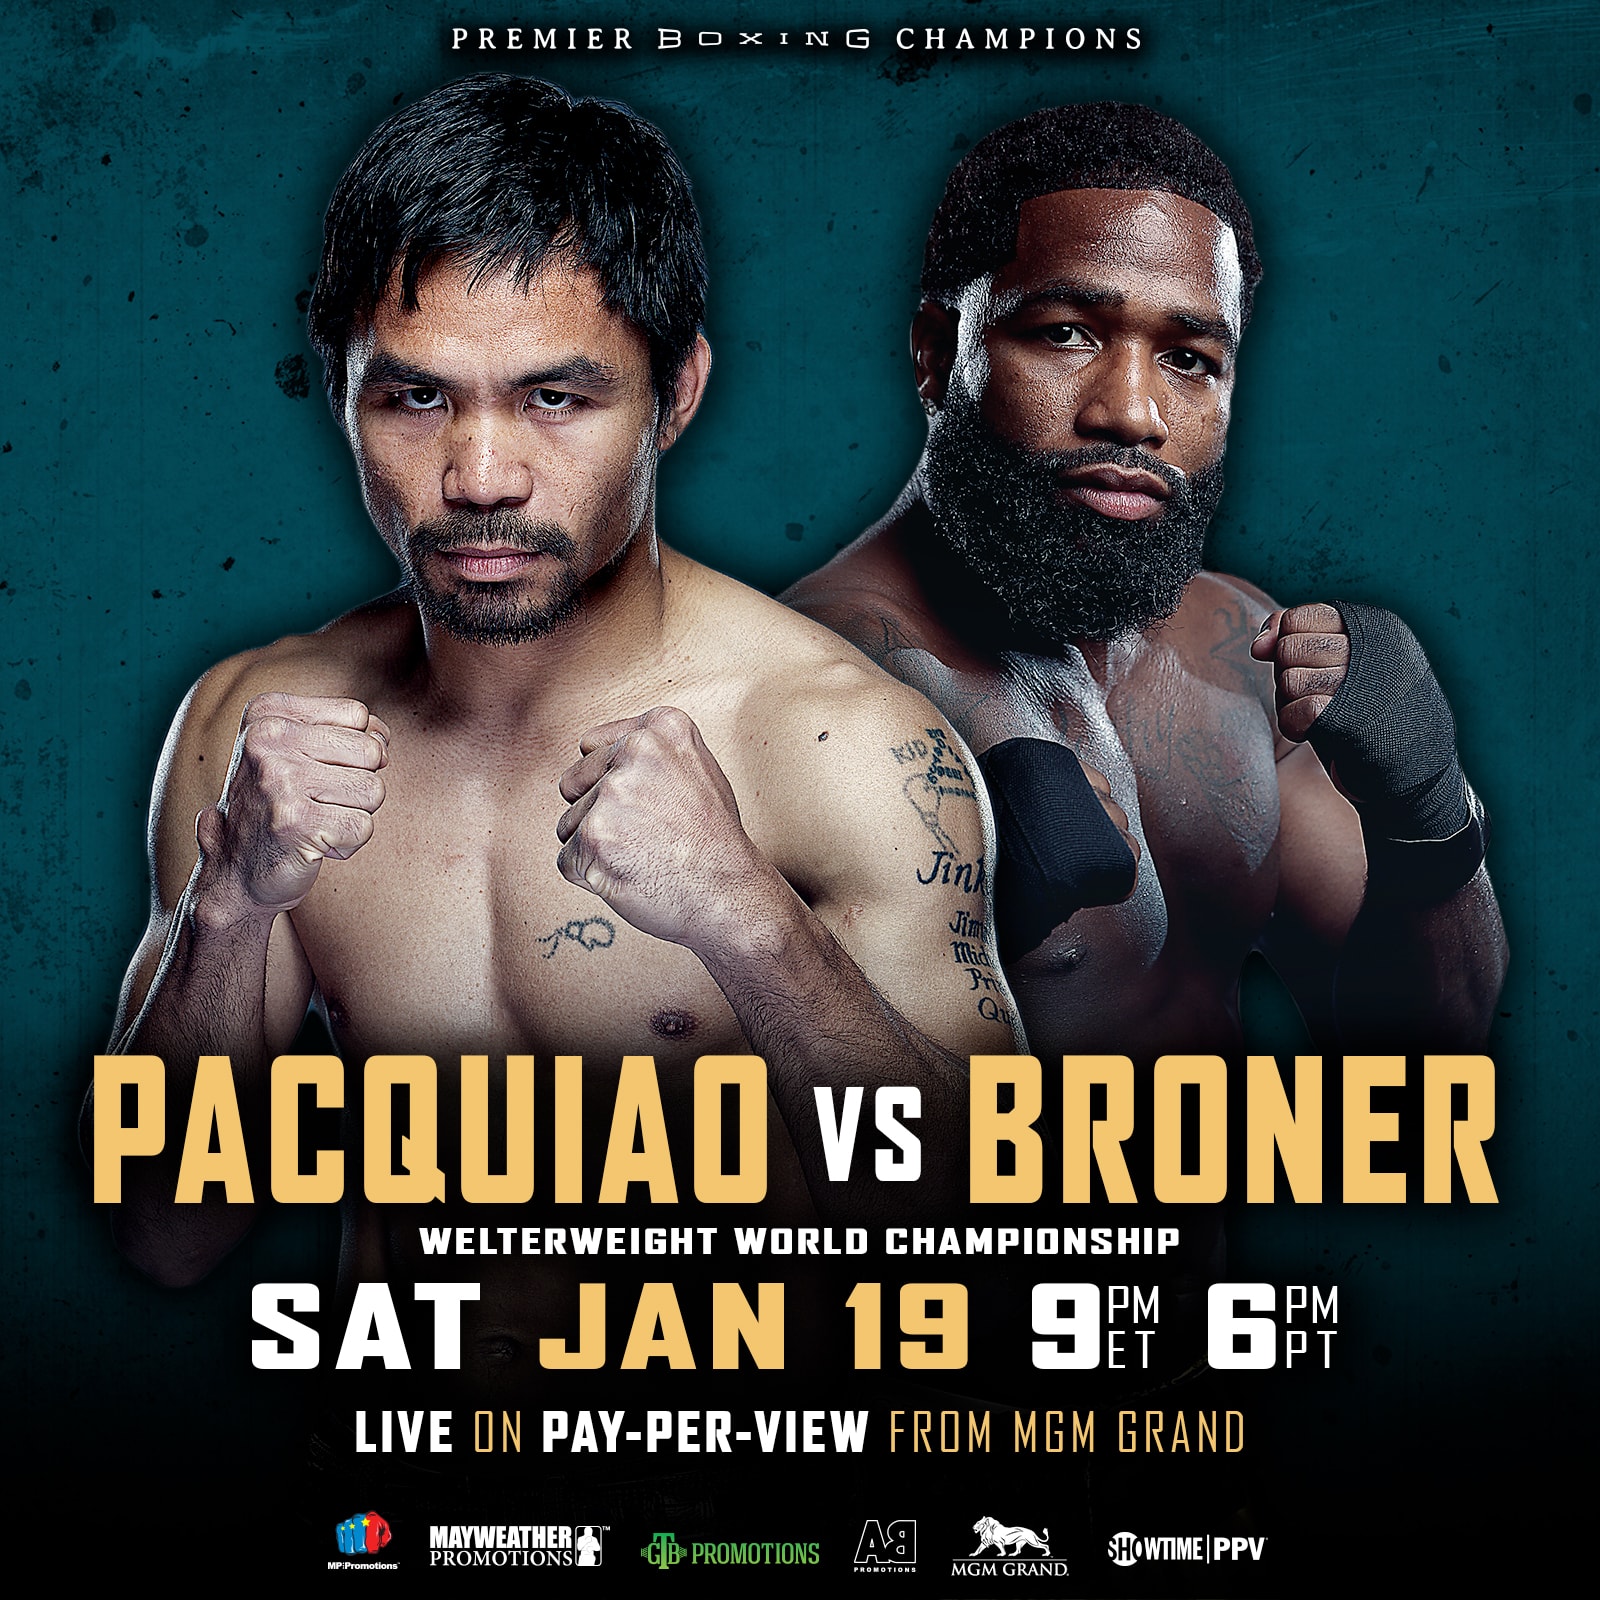 Manny Pacquiao vs. Adrien Broner on Jan. 19th from MGM Grand Garden Arena in Las Vegas